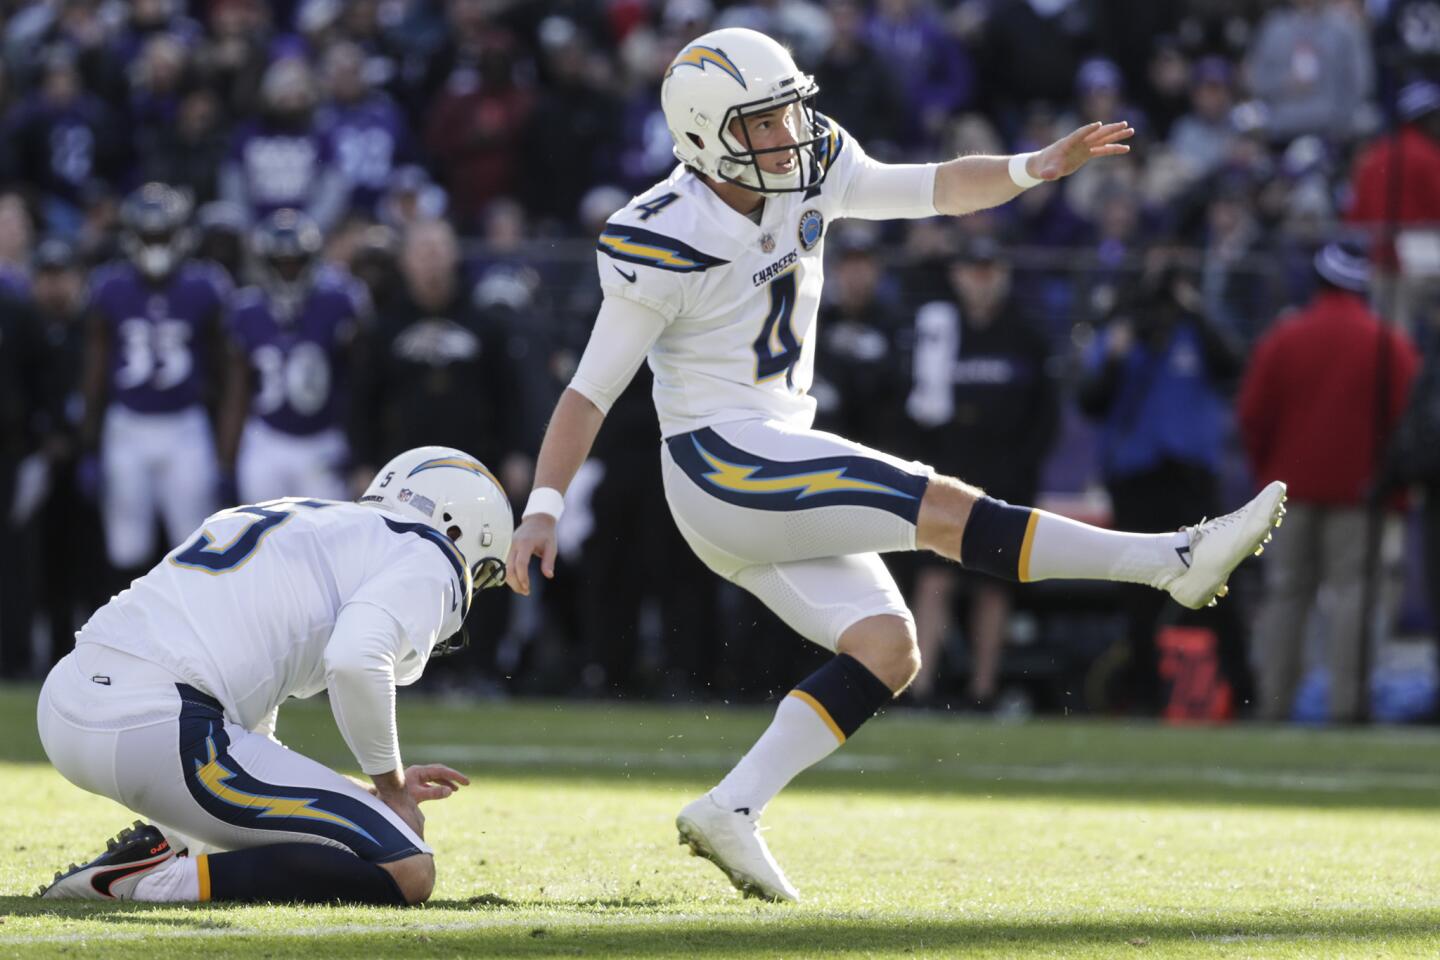 Chargers kicker Michael Badgley kicks the first of four first-half field goals against the Ravens.